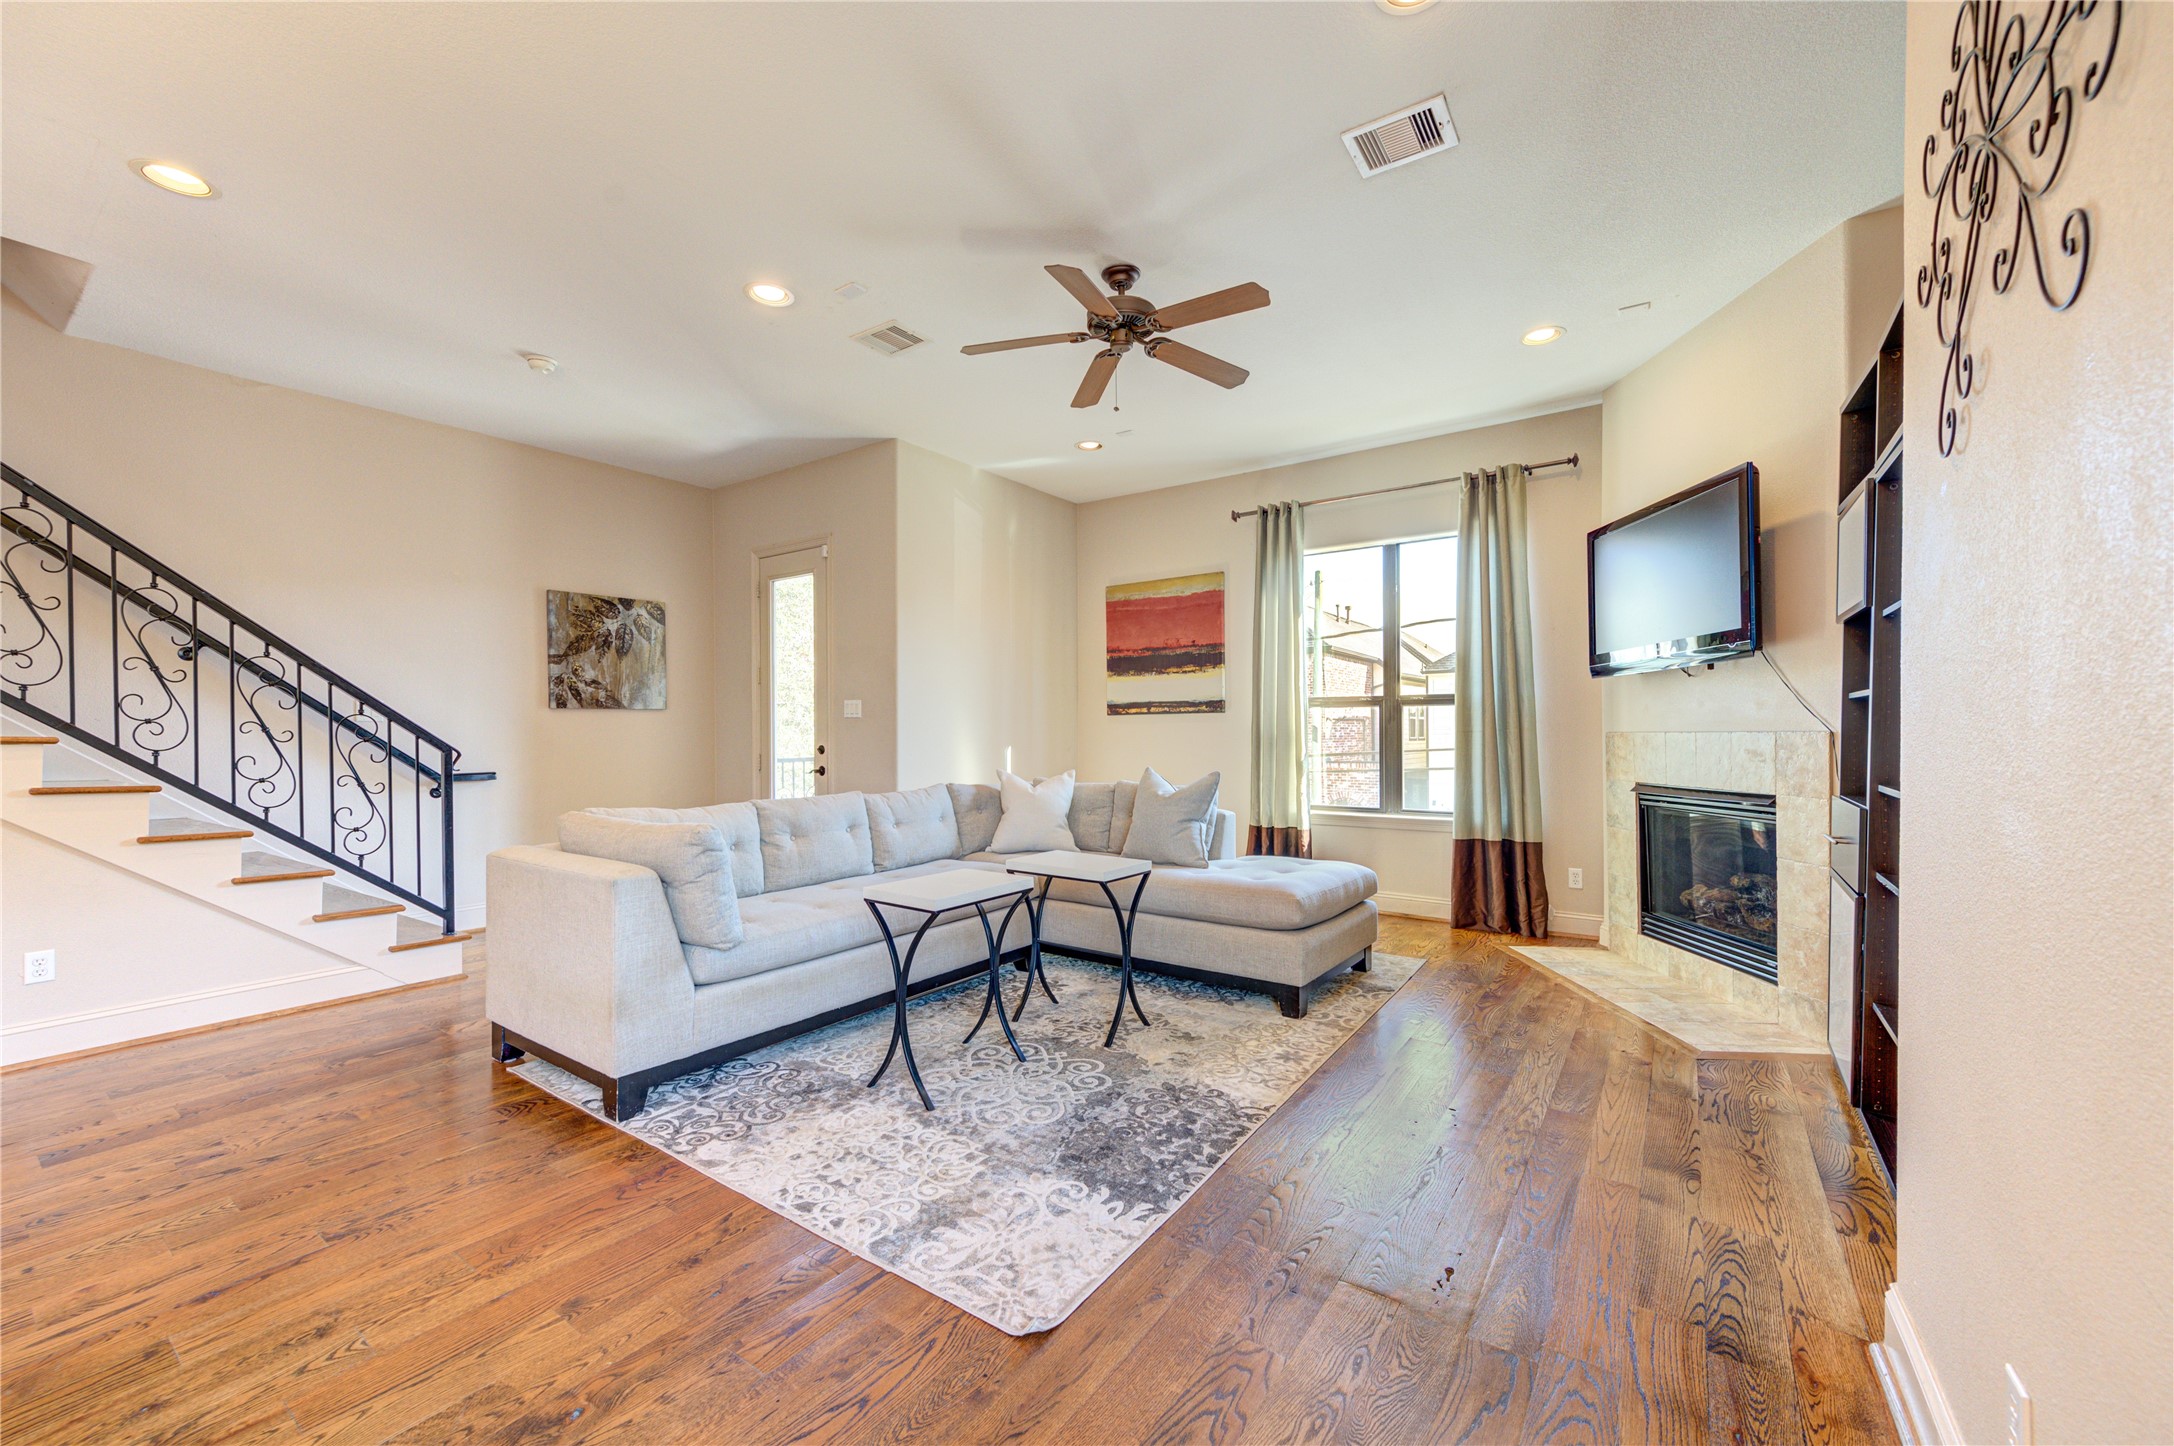 Welcome home to your 3 bedroom/3.5 bath home, with open spaces with plenty of natural light, hardwood floors, and a cozy fireplace.